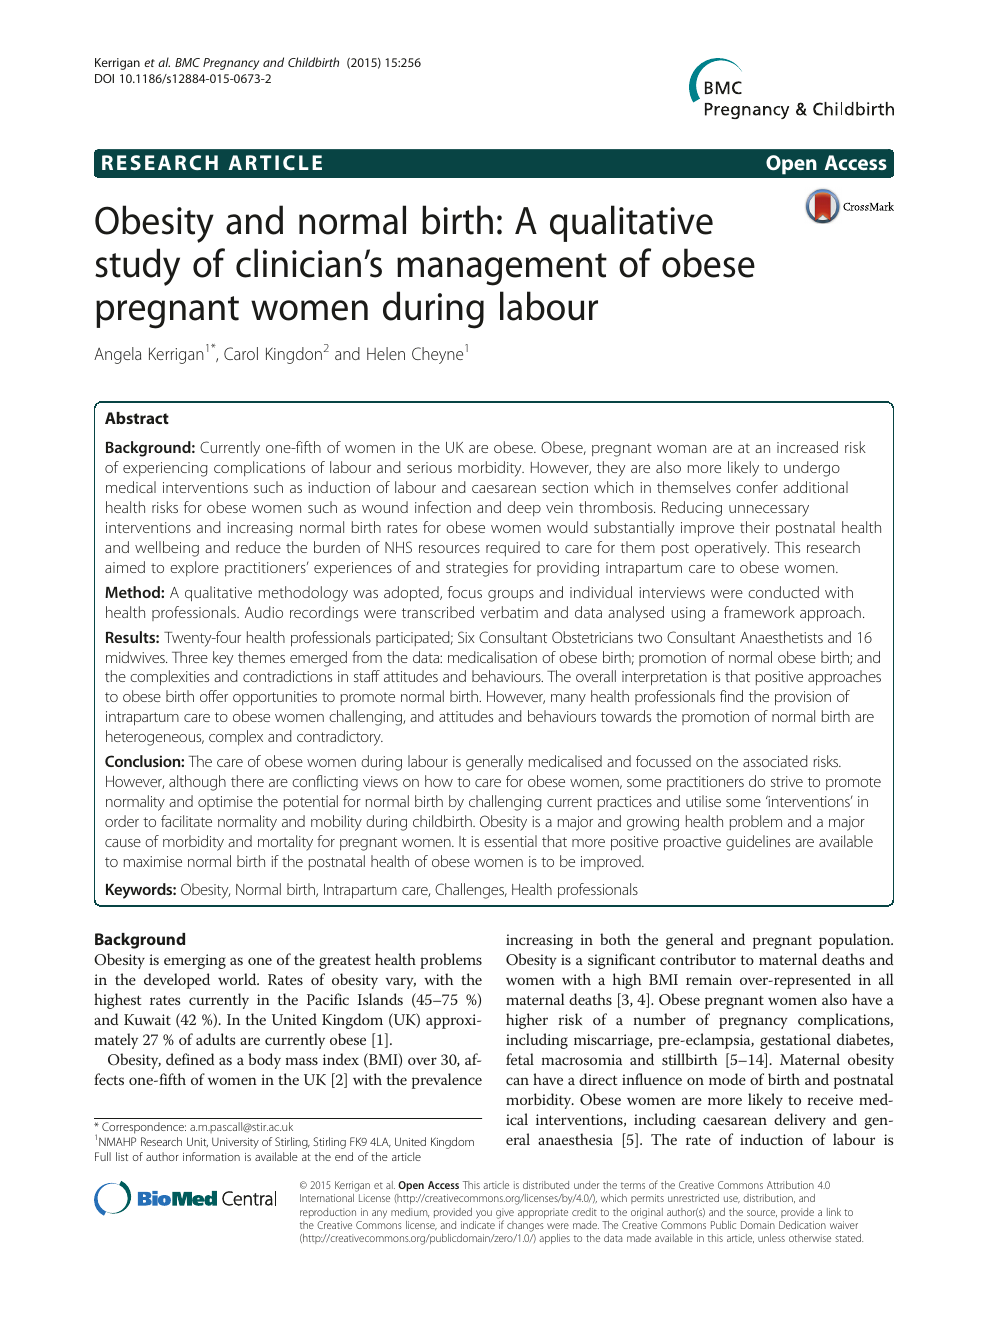 Obesity And Normal Birth A Qualitative Study Of Clinician S